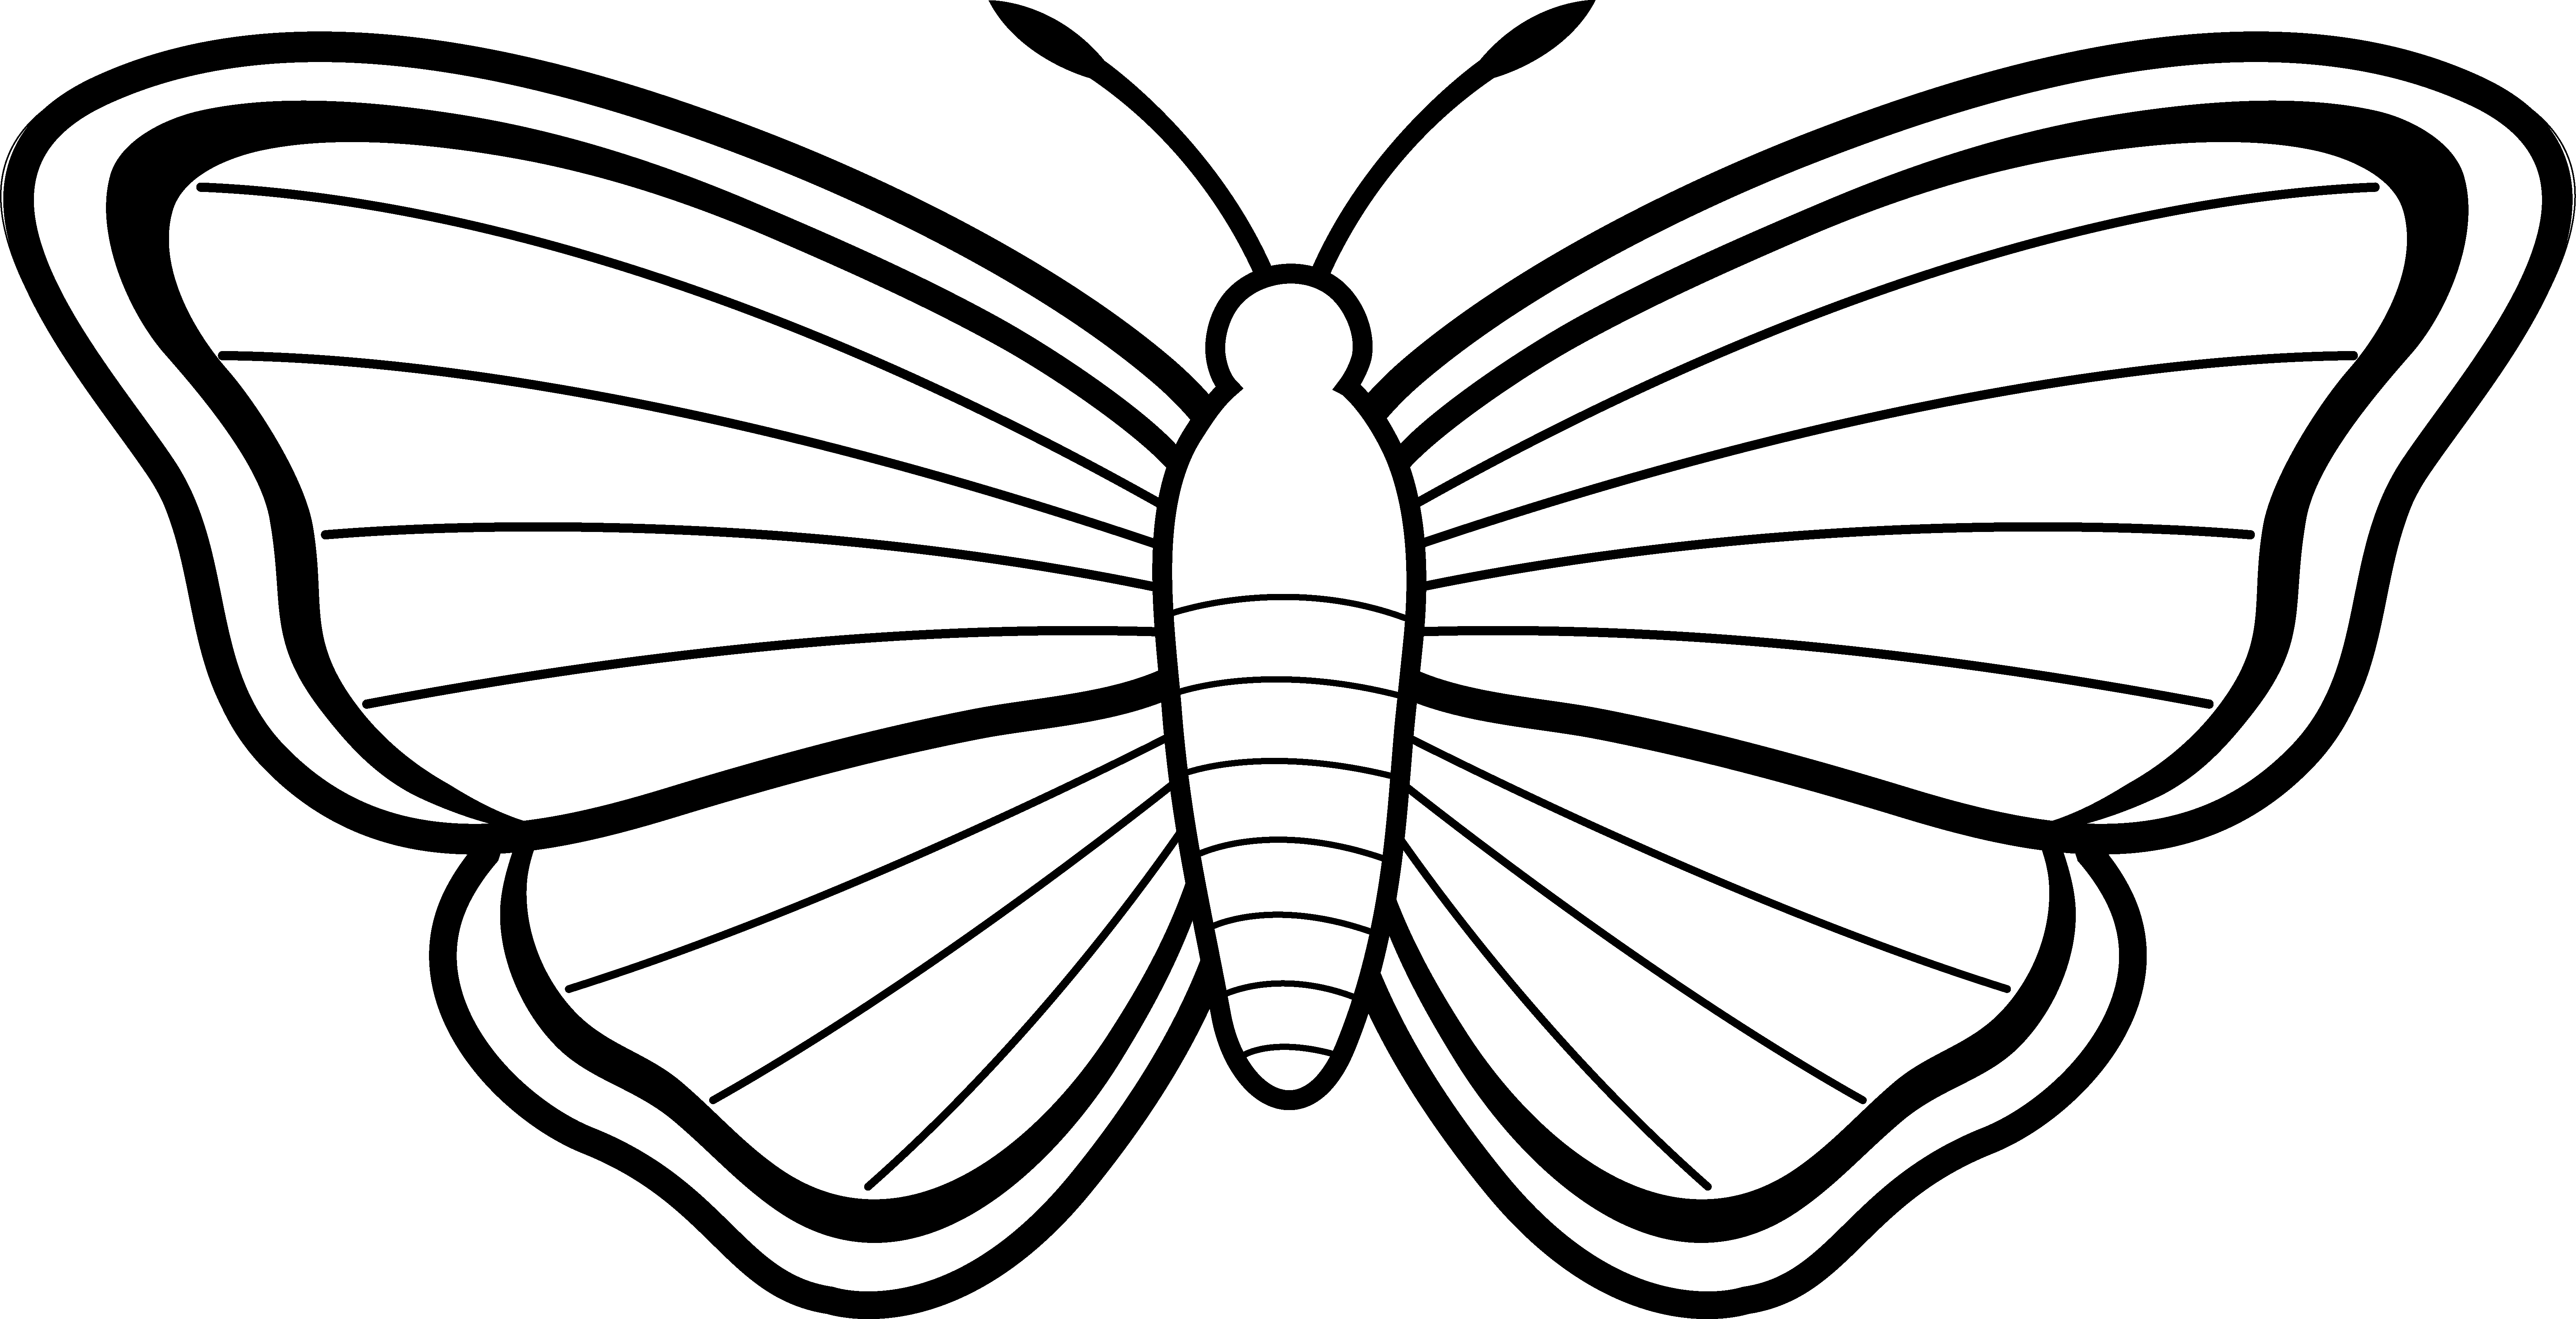 Free butterflies black and. Mosquito clipart outline